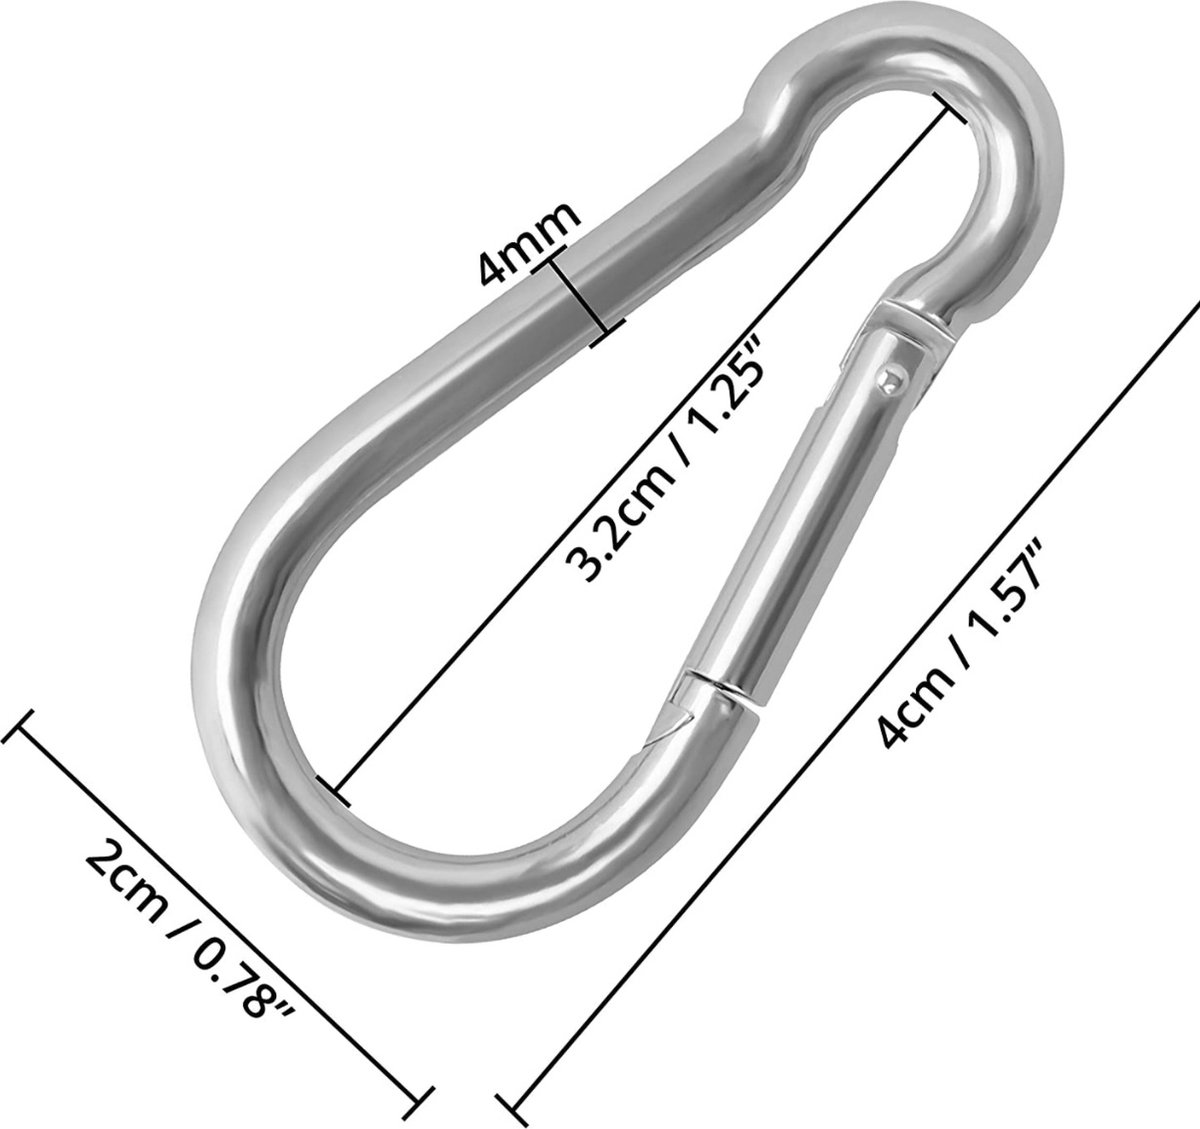 Belle Vous RVS Click Ring Veer M4 Karabijnhaak Clips (15 Pack) - Belle Vous Stainless Steel Click Ring Feather M4 Carabiner Clips (15 Pack) - 4cm – Multifunctional Durable Outdoor/Indoor Carbines For Keychains, Camping, Fishing and Hiking Accessories